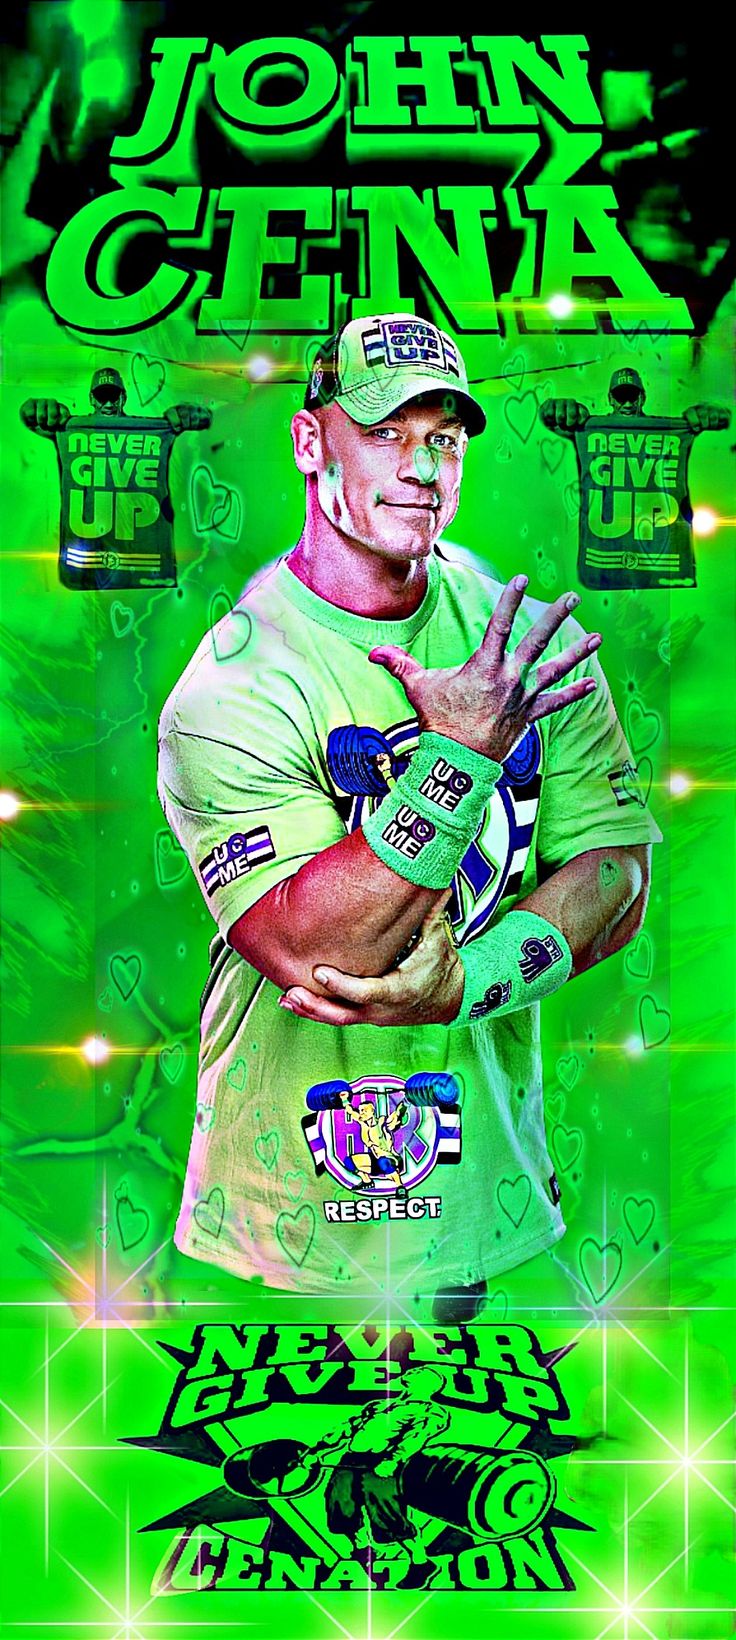 Wallpaper John Cena WWE. John cena, Wwe wallpaper, Wwe picture